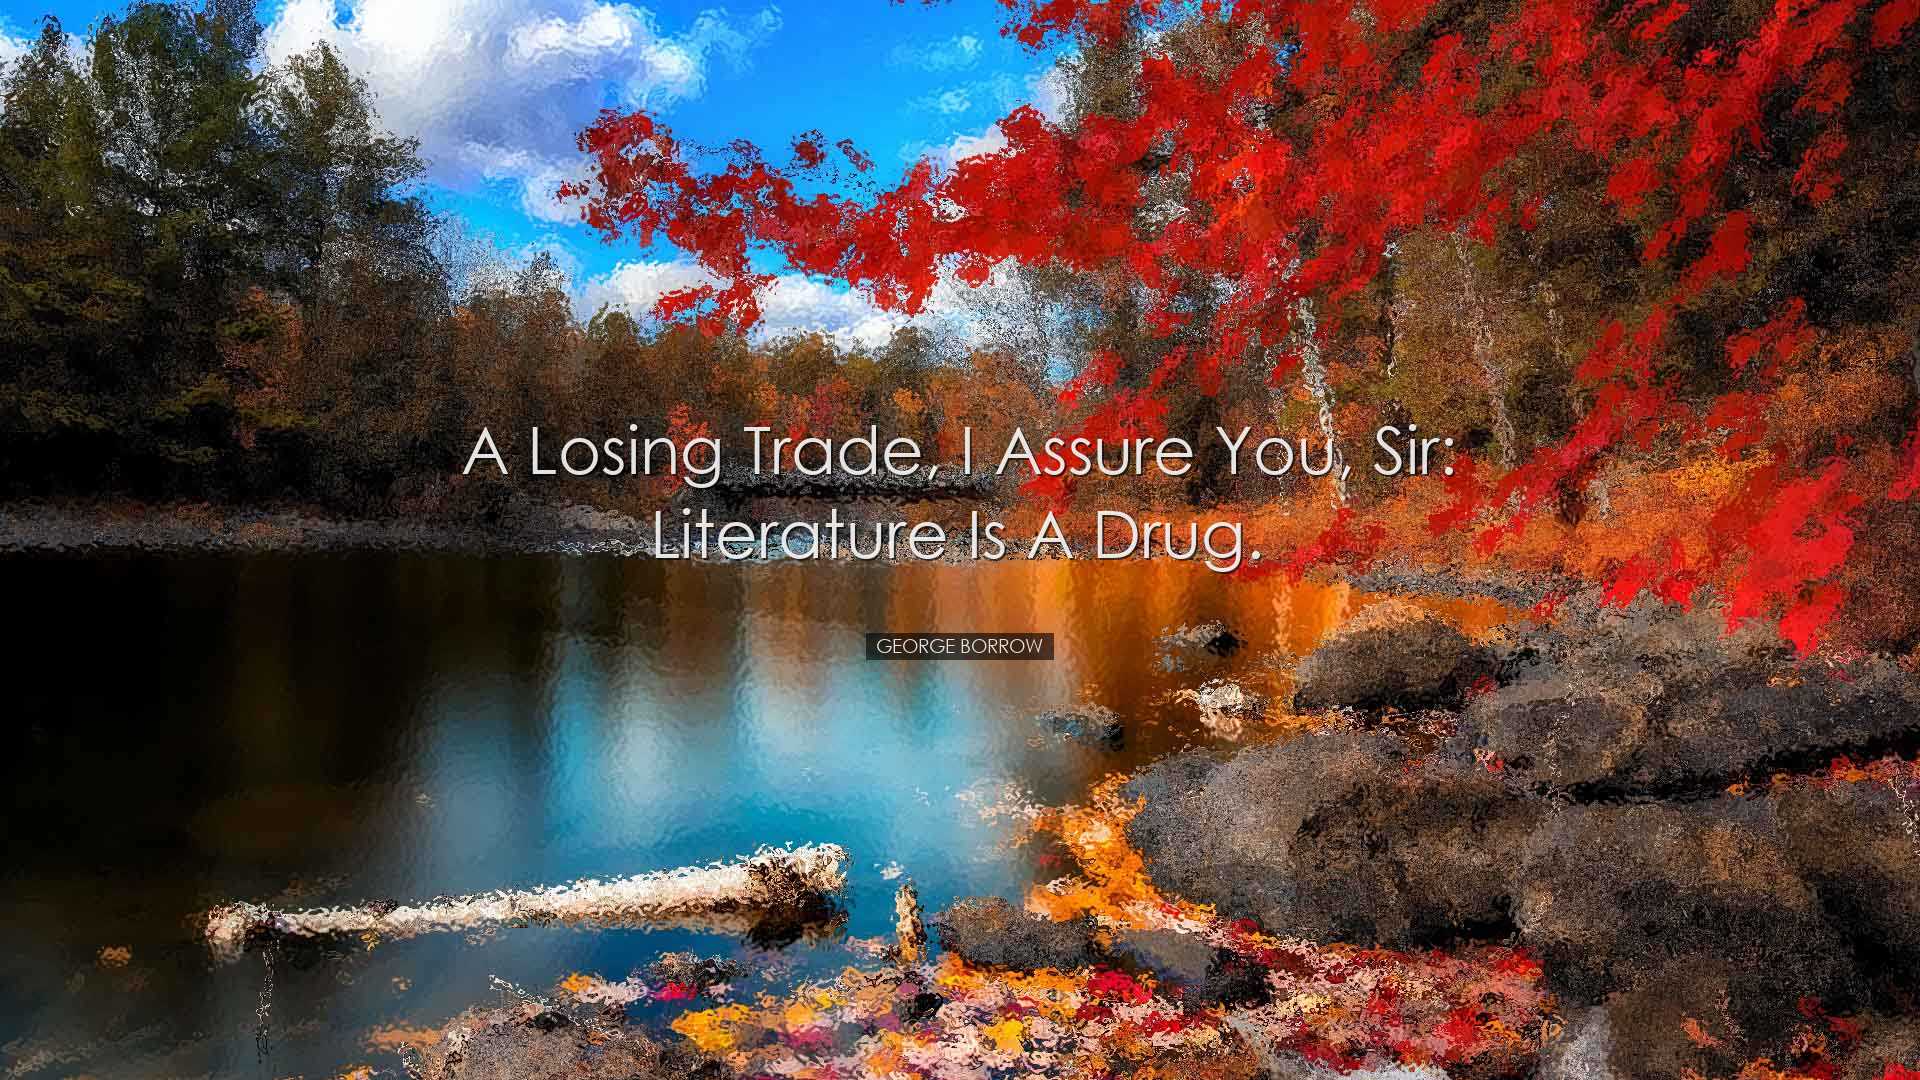 A losing trade, I assure you, sir: literature is a drug. - George